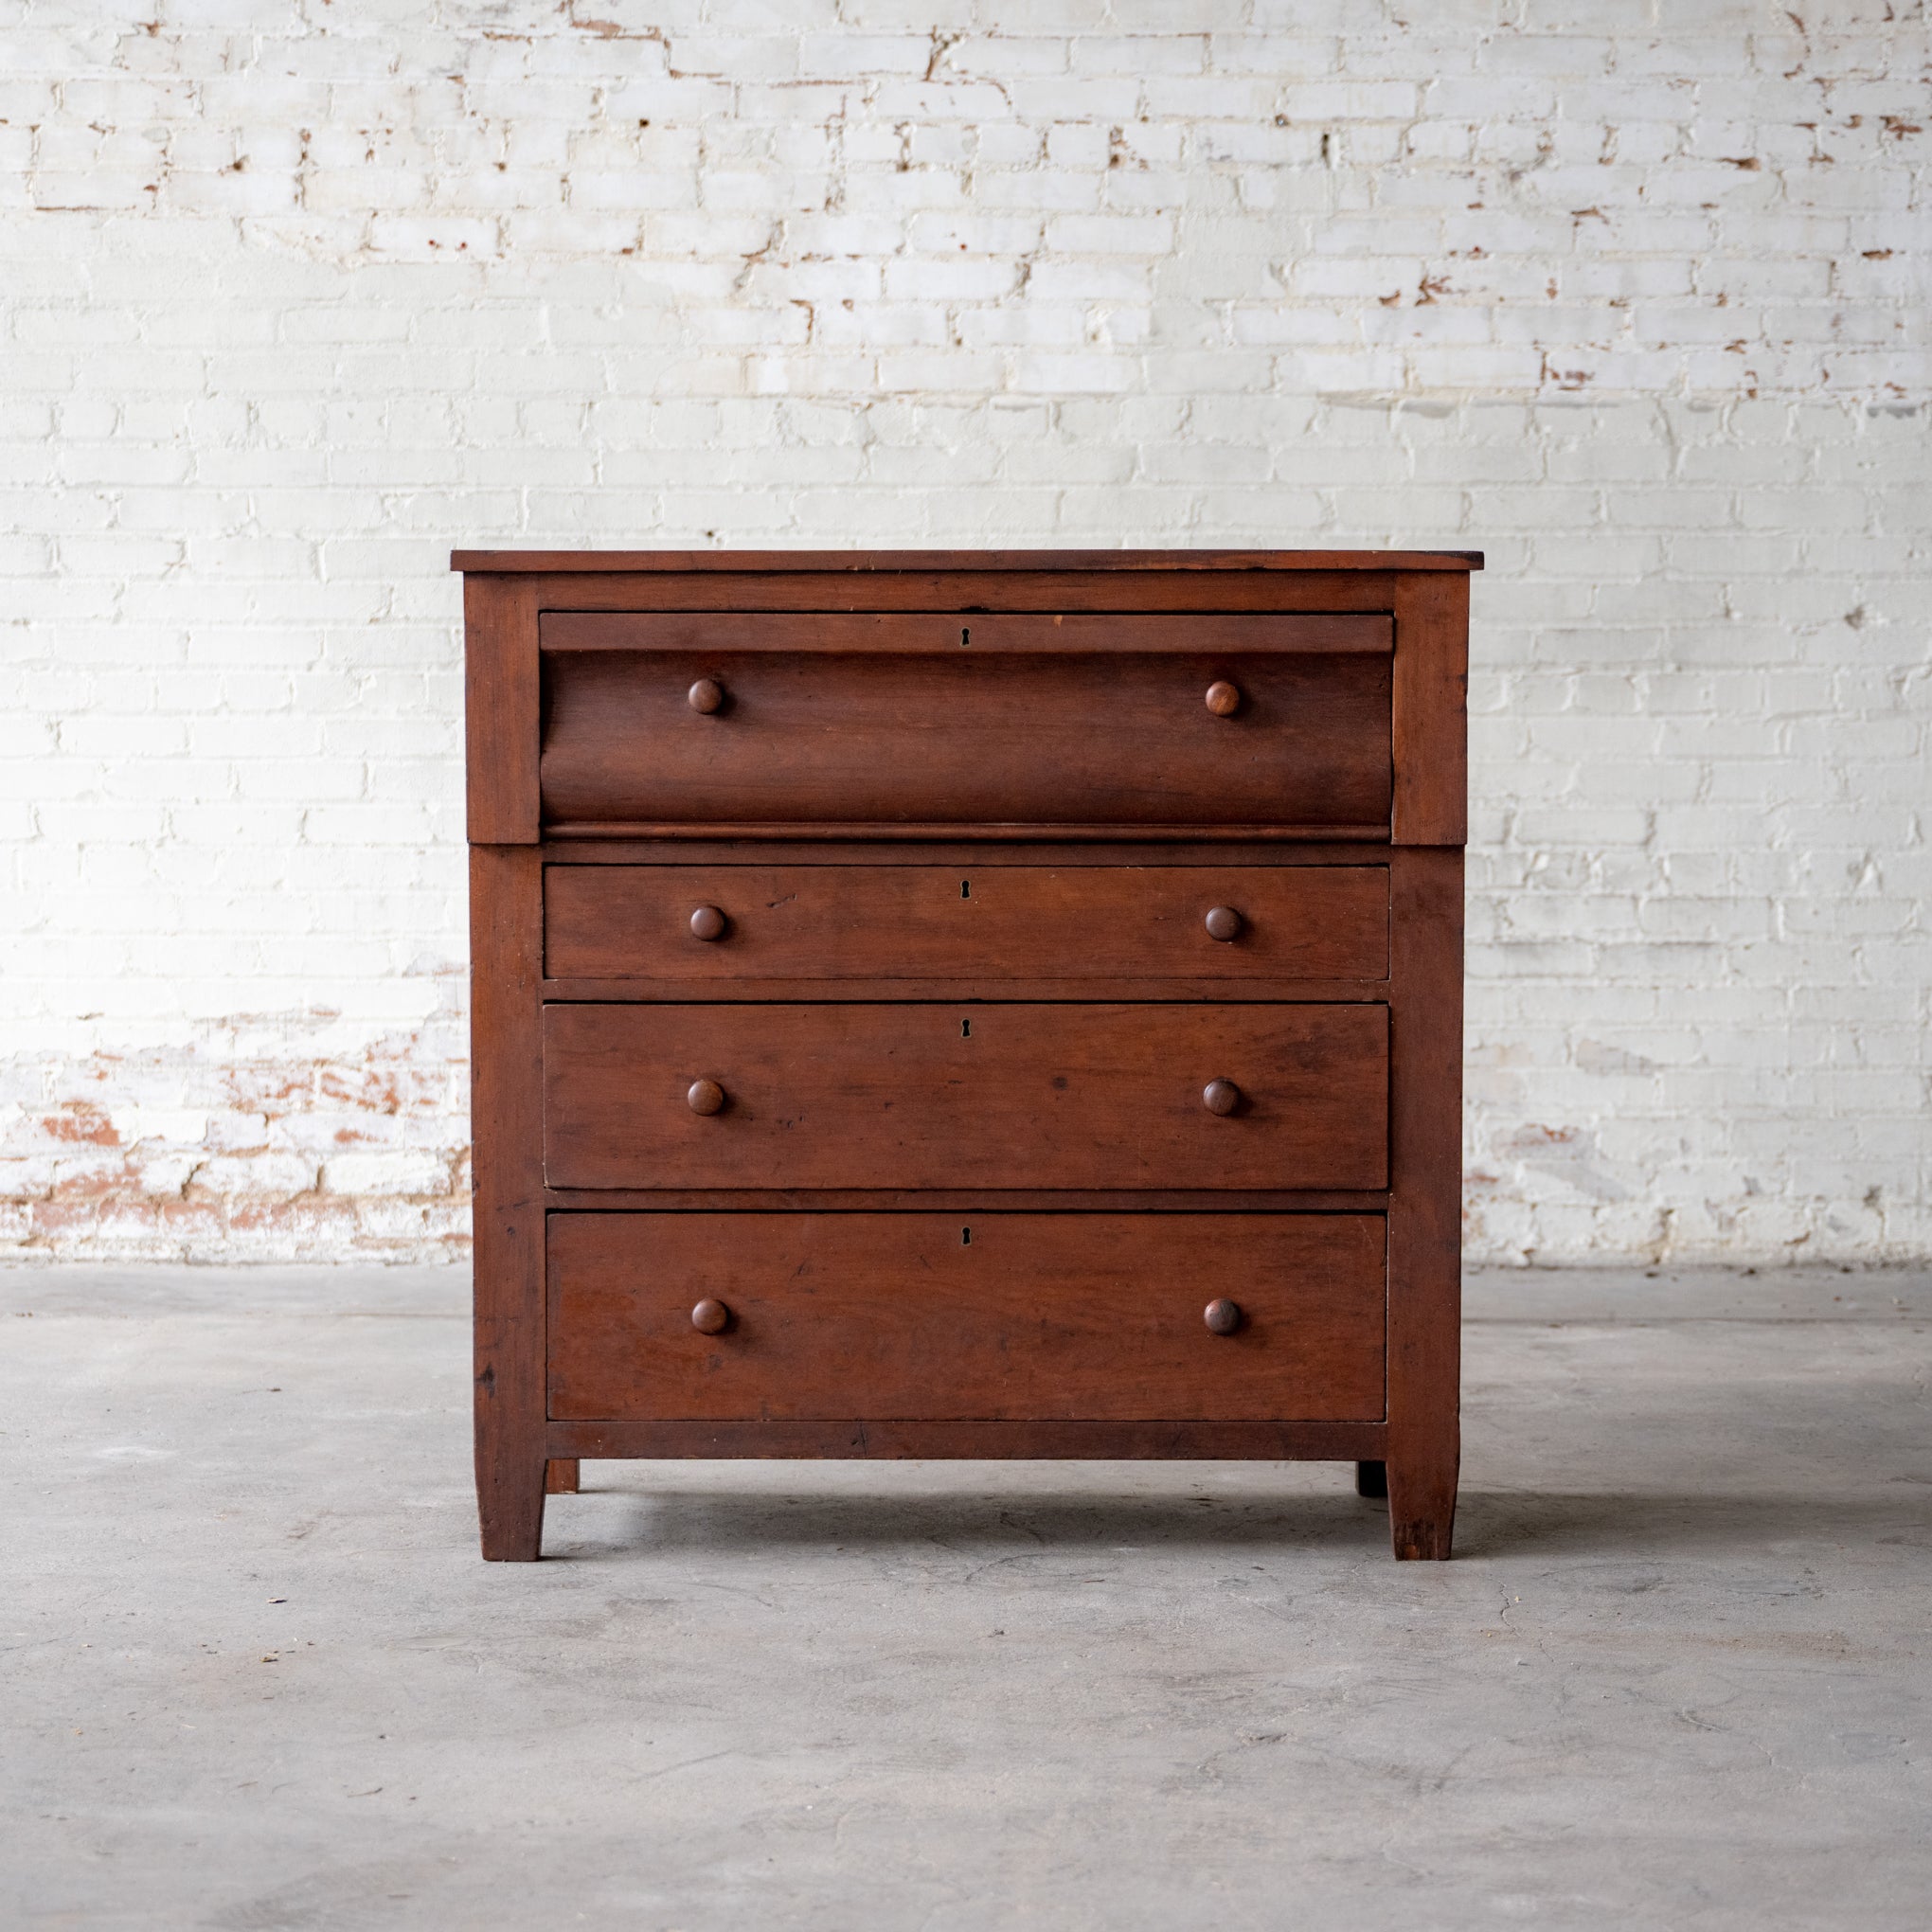 Antique Walnut Chest of Drawers $2650.00